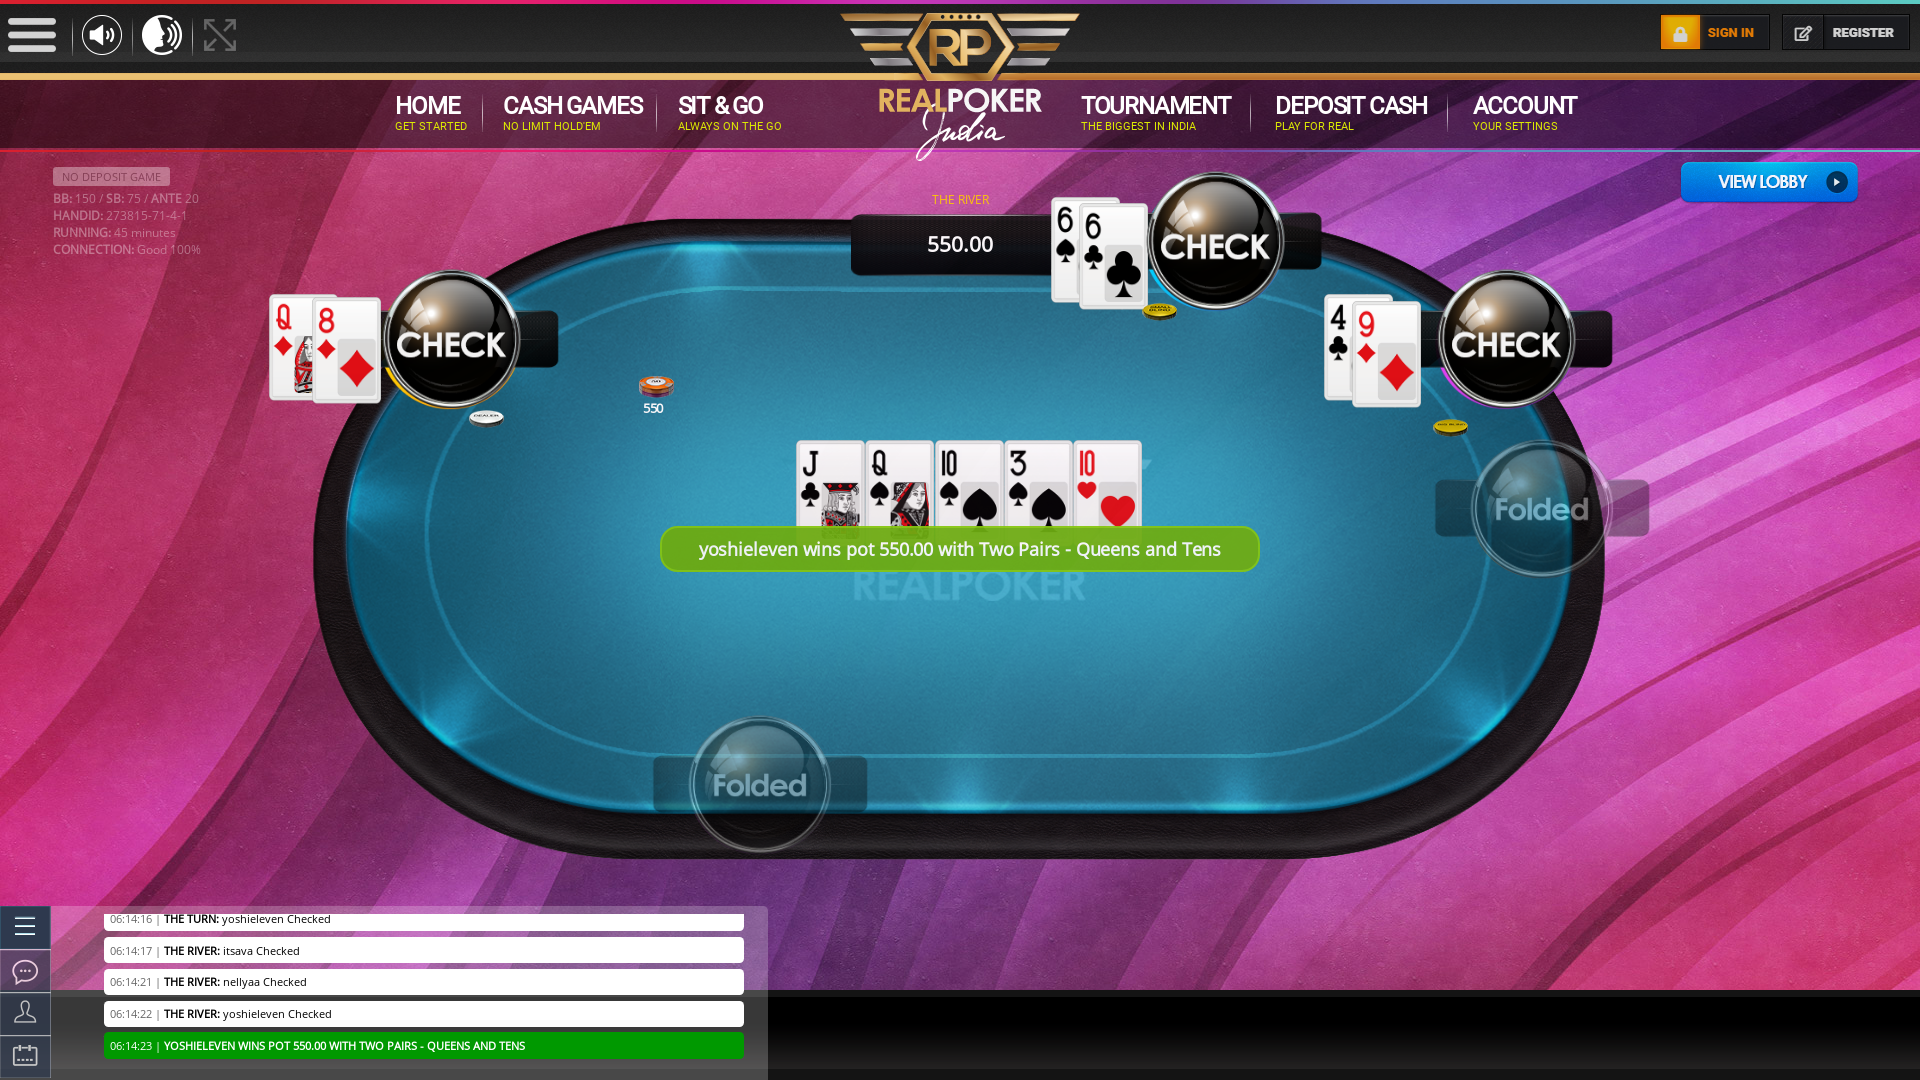 Real poker on a 10 player table in the 45th minute of the game